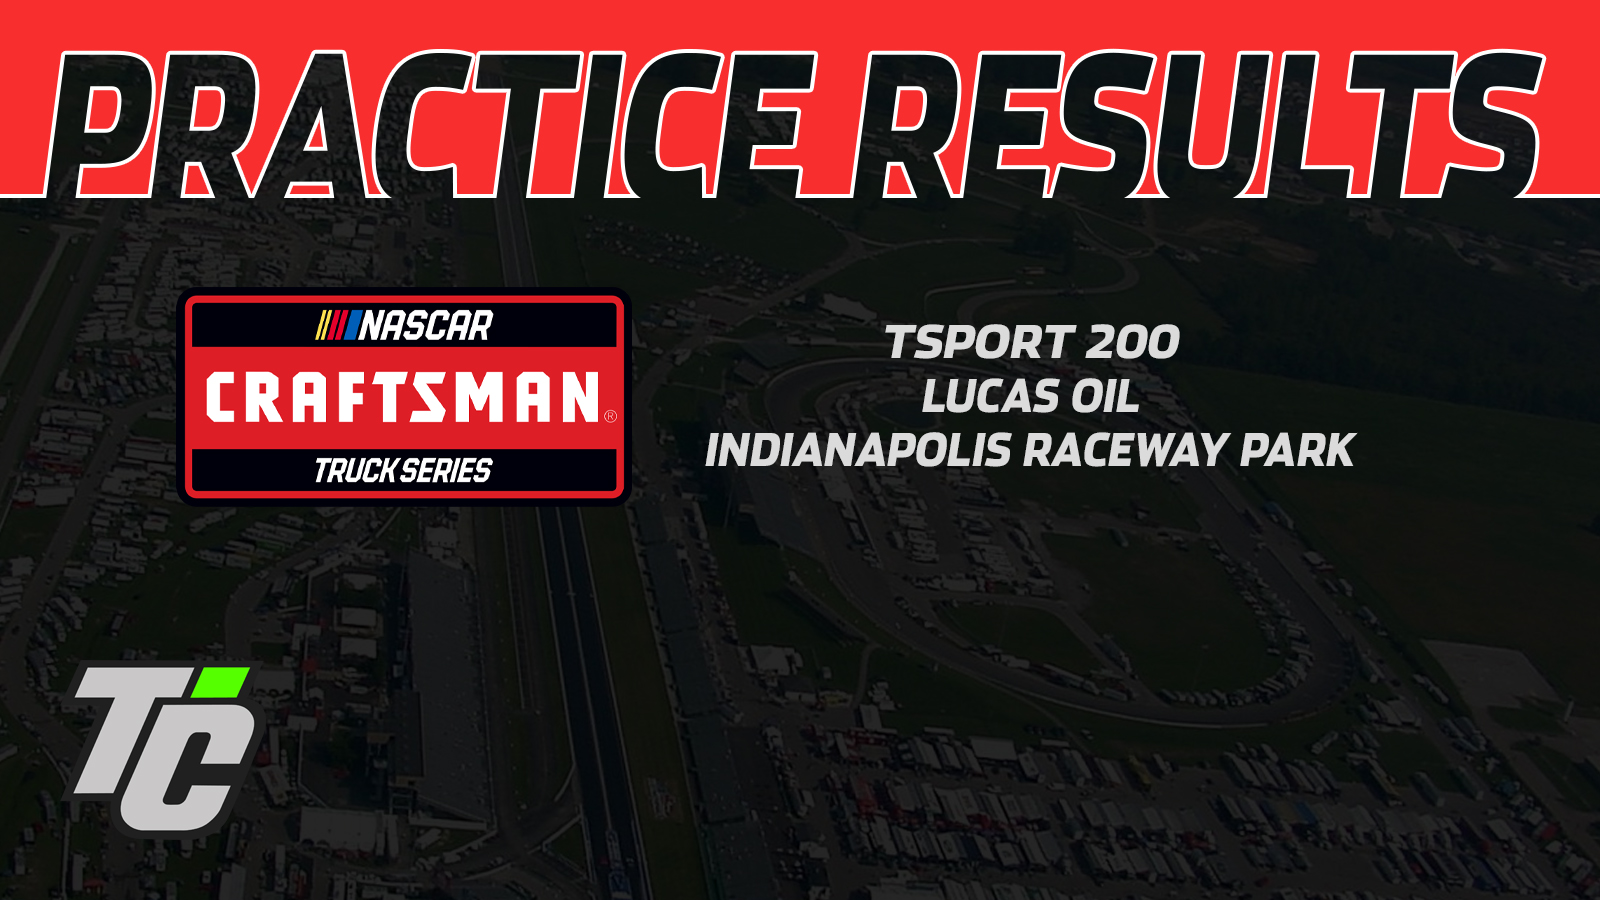 TSPORT 200 practice results NASCAR Craftsman Truck Series Indianapolis Raceway Park IRP